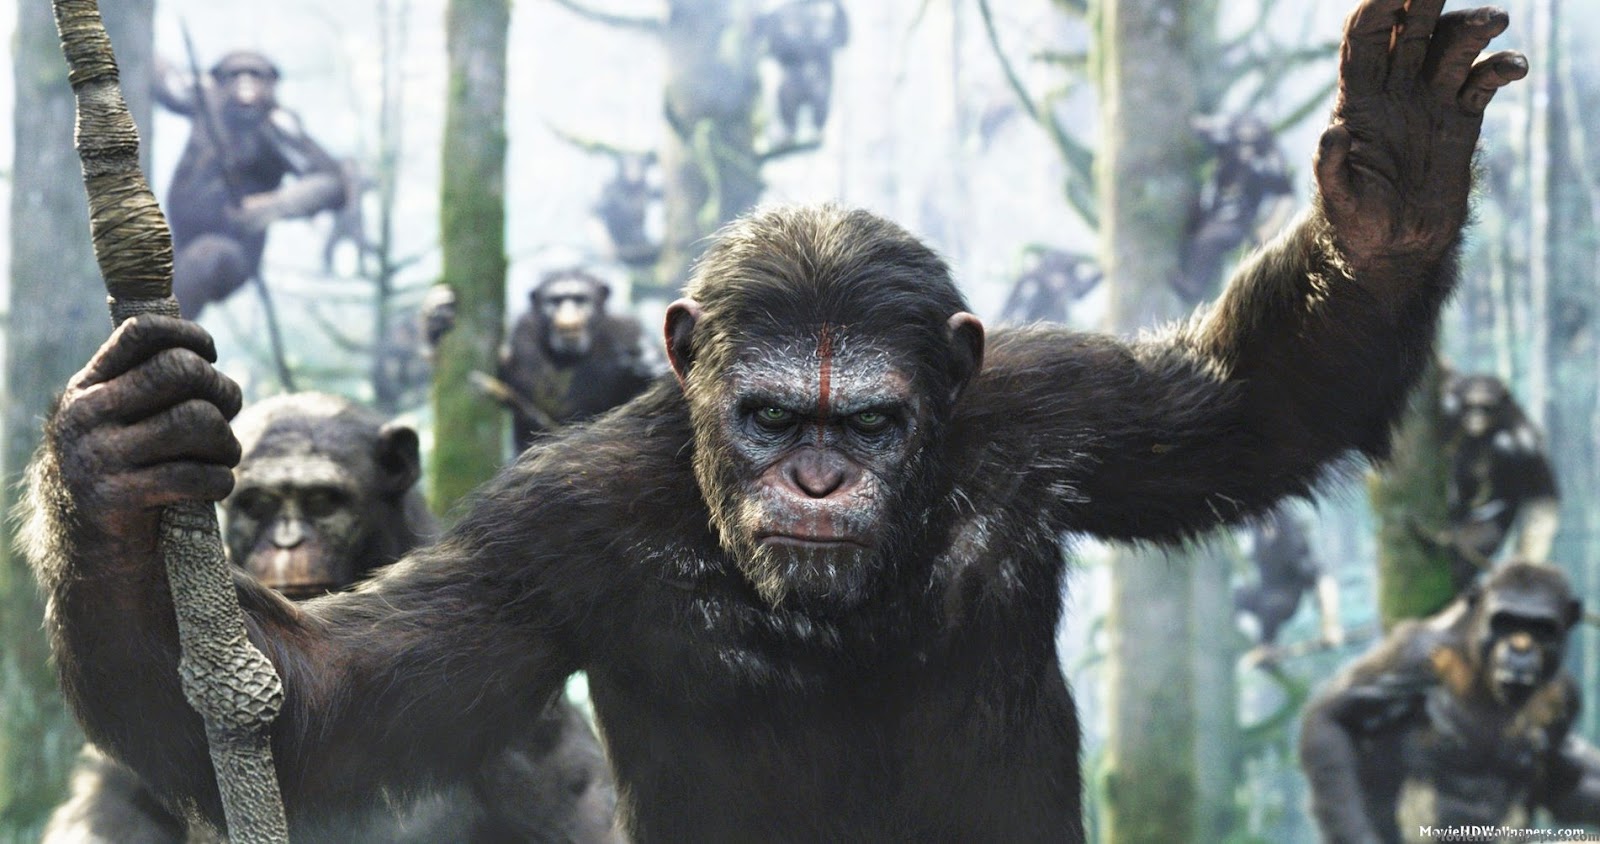 dawn of the planet of the apes wallpaper,common chimpanzee,terrestrial animal,primate,human,organism